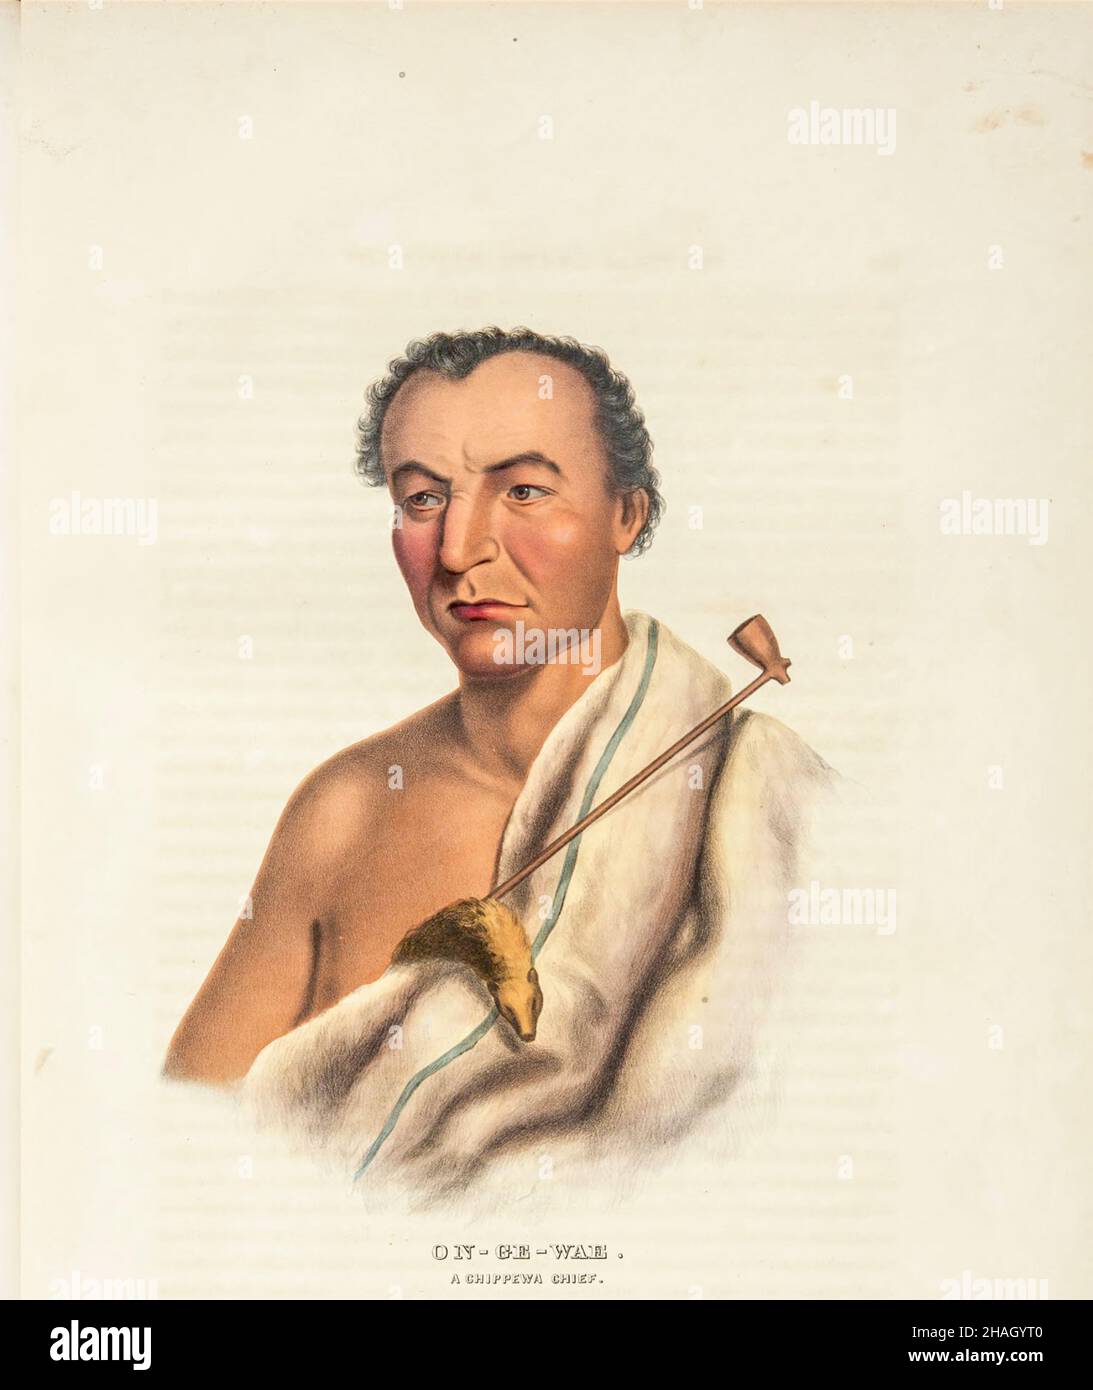 ON-GE-WAE. A CHIPPEWA CHIEF from the book ' History of the Indian Tribes of North America with biographical sketches and anecdotes of the principal chiefs. ' Volume 3 of 3 by Thomas Loraine,McKenney, and James Hall Esq. Published in 1844 Painted by Charles Bird King Stock Photo